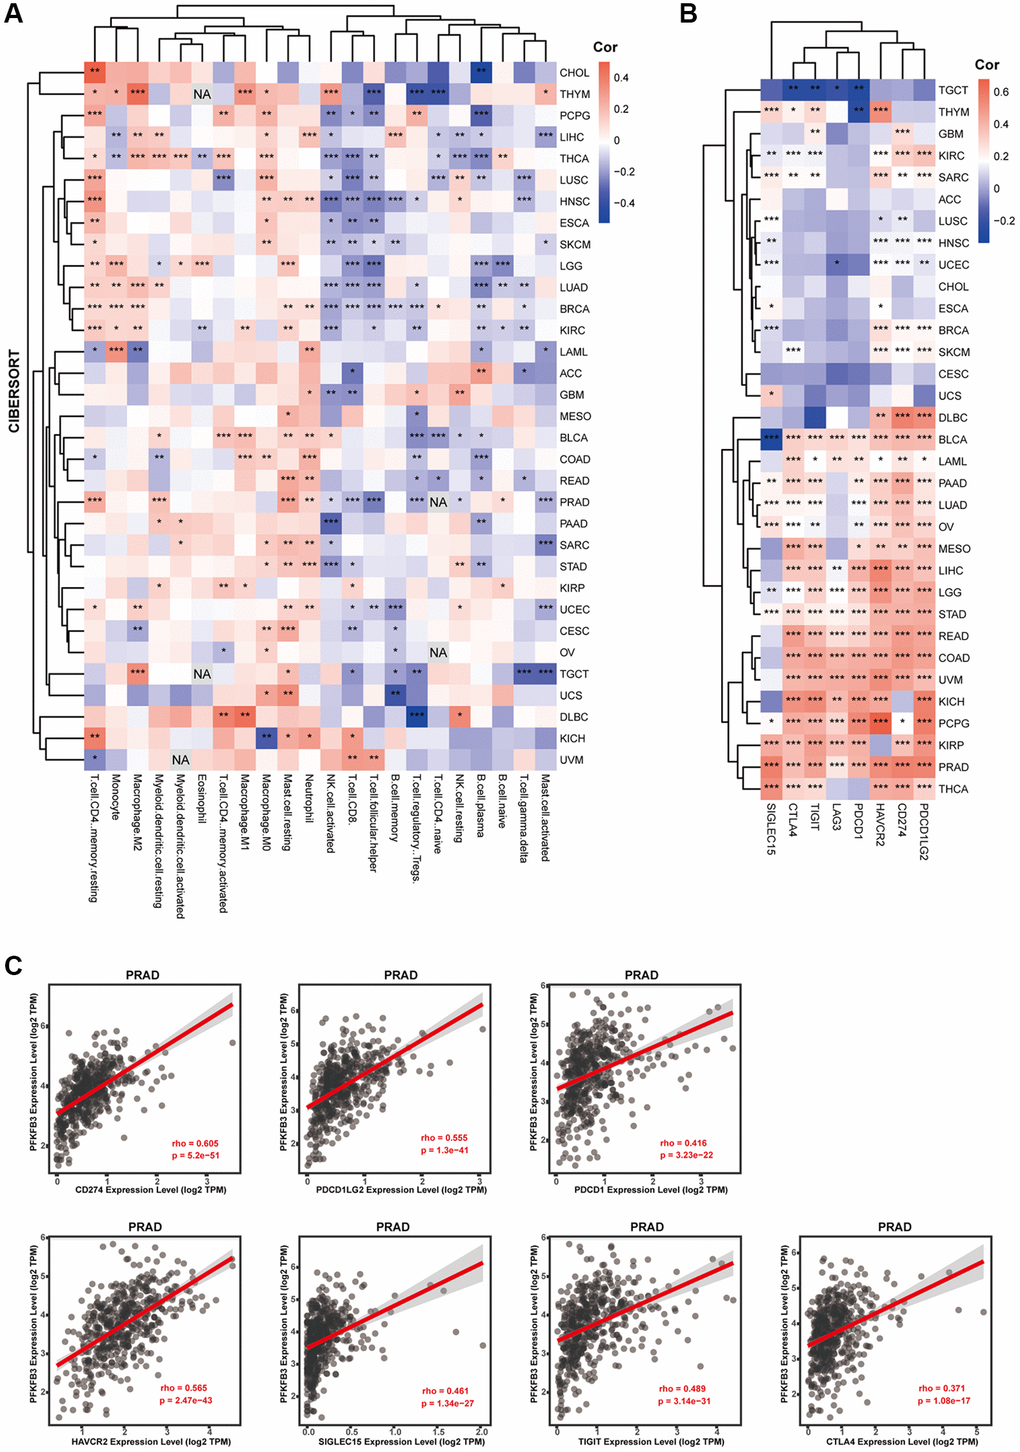 The correlation between PFKFB3 expression and immune infiltration or immune checkpoint in pan-cancer. (A) Correlation analysis between PFKFB3 expression and immunological infiltration in pan-cancer by CIBERSORT algorithm. (B) Correlation analysis between PFKFB3 expression and immune checkpoint in pan-cancer. (C) The association between PFKFB3 expression and CD274, PDCD1LG2, and PDCD1, HAVCR2, SIGLEC15, TIGIT, and CTLA4 in PRAD. All data *P **P ***P 